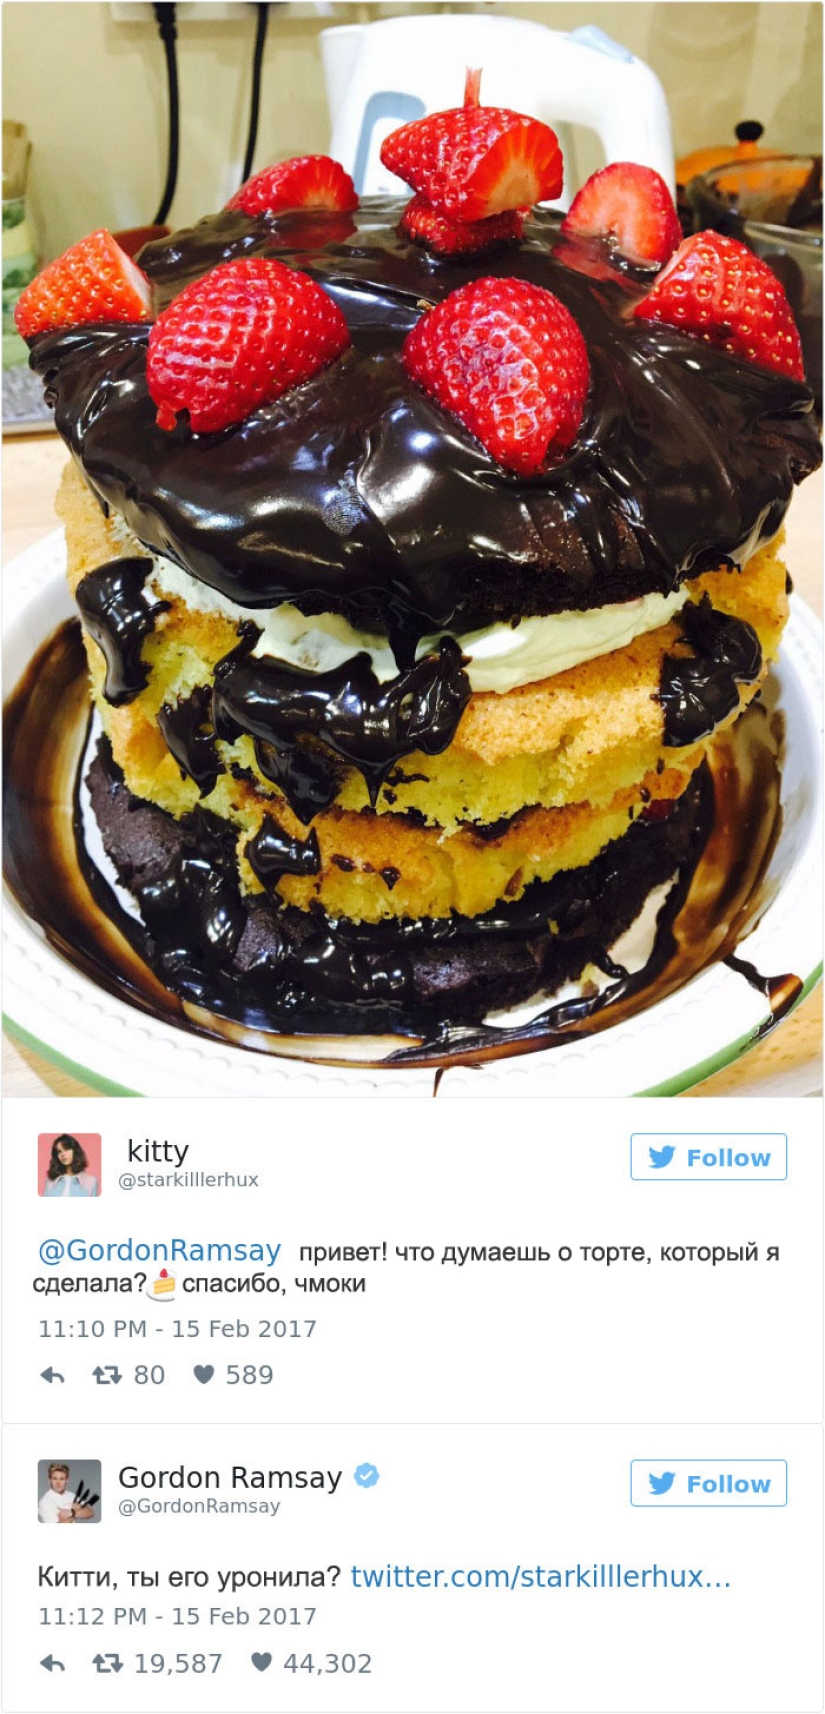 These people regretted tweeting their dishes to chef Gordon Ramsay